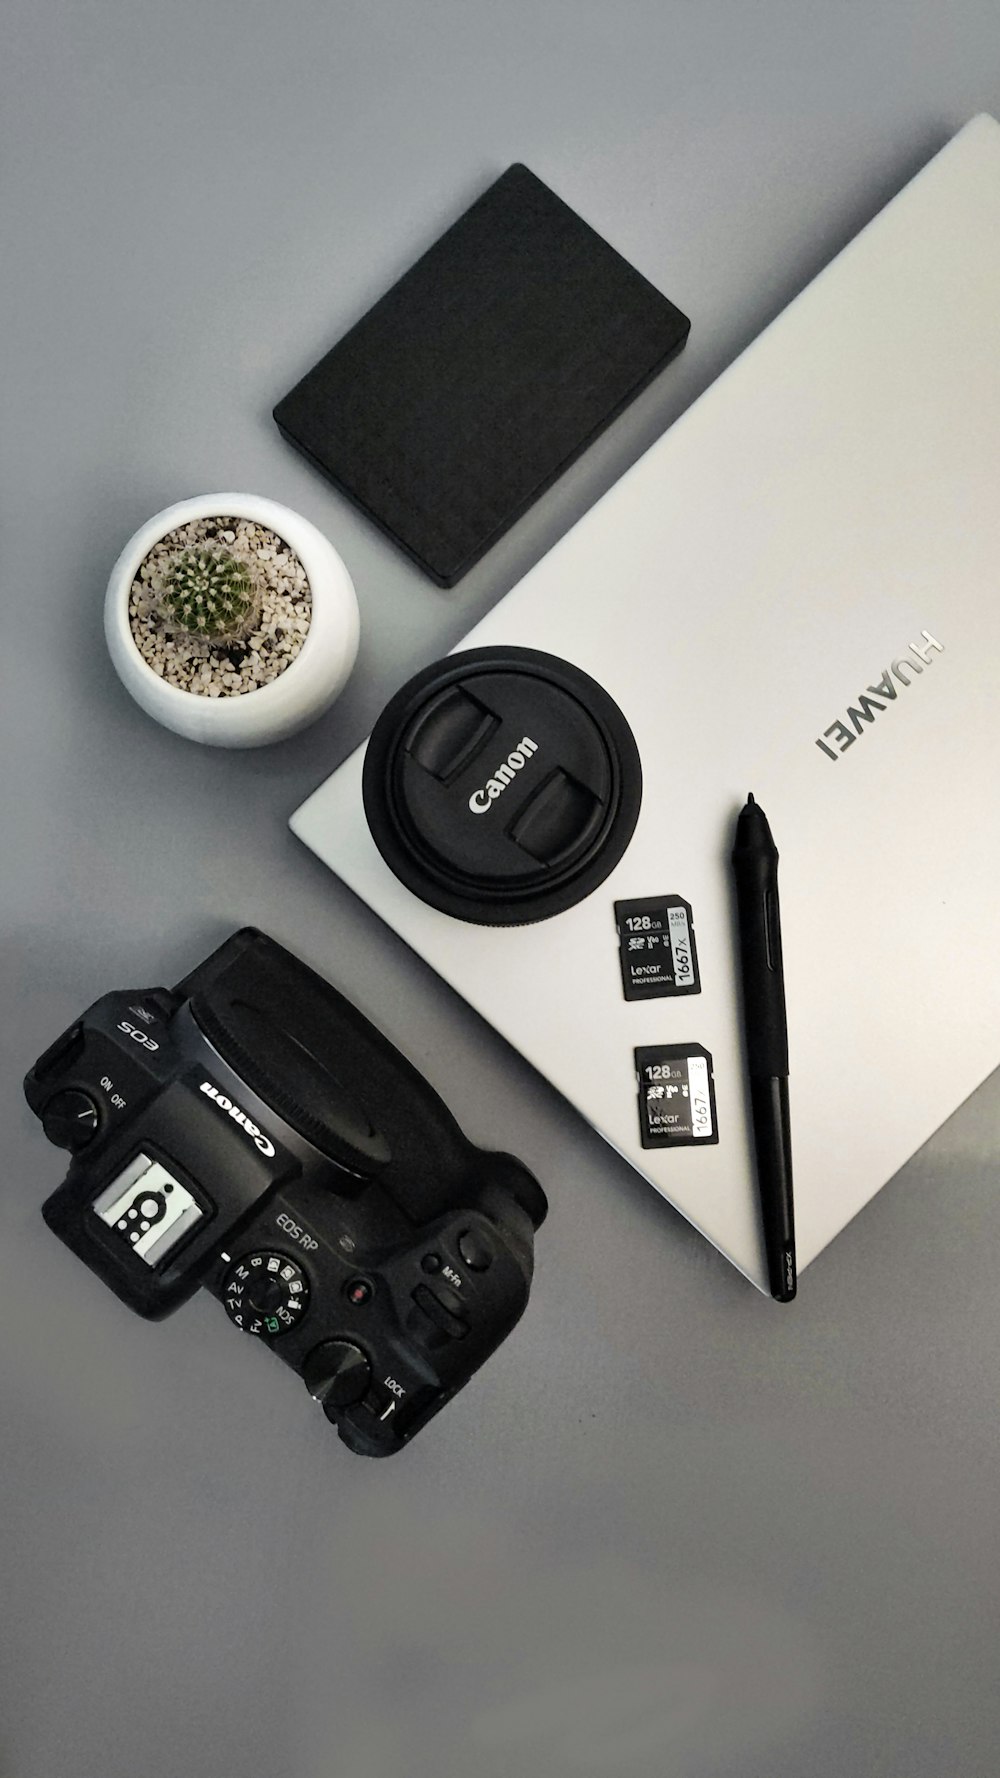 a camera, a bowl of flowers, a pen, and a laptop on a